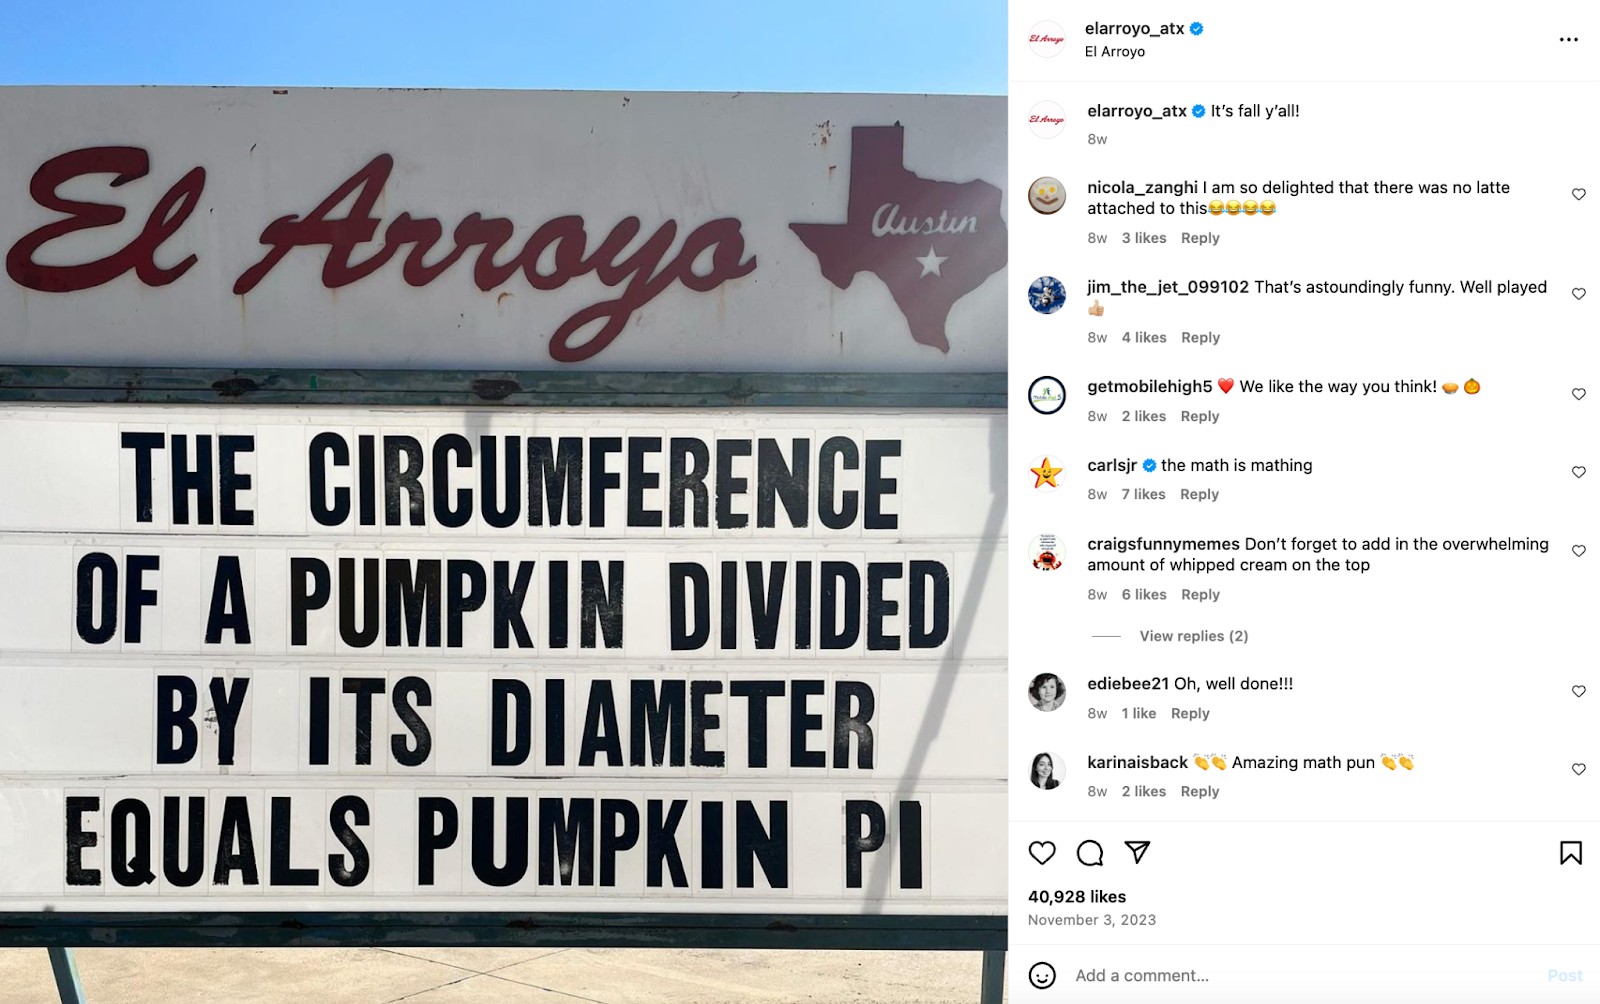 Creative restaurant marketing ideas: Austin-based restaurant El Arroyo is famous for its marquee sign that displays cheeky sayings and jokes.